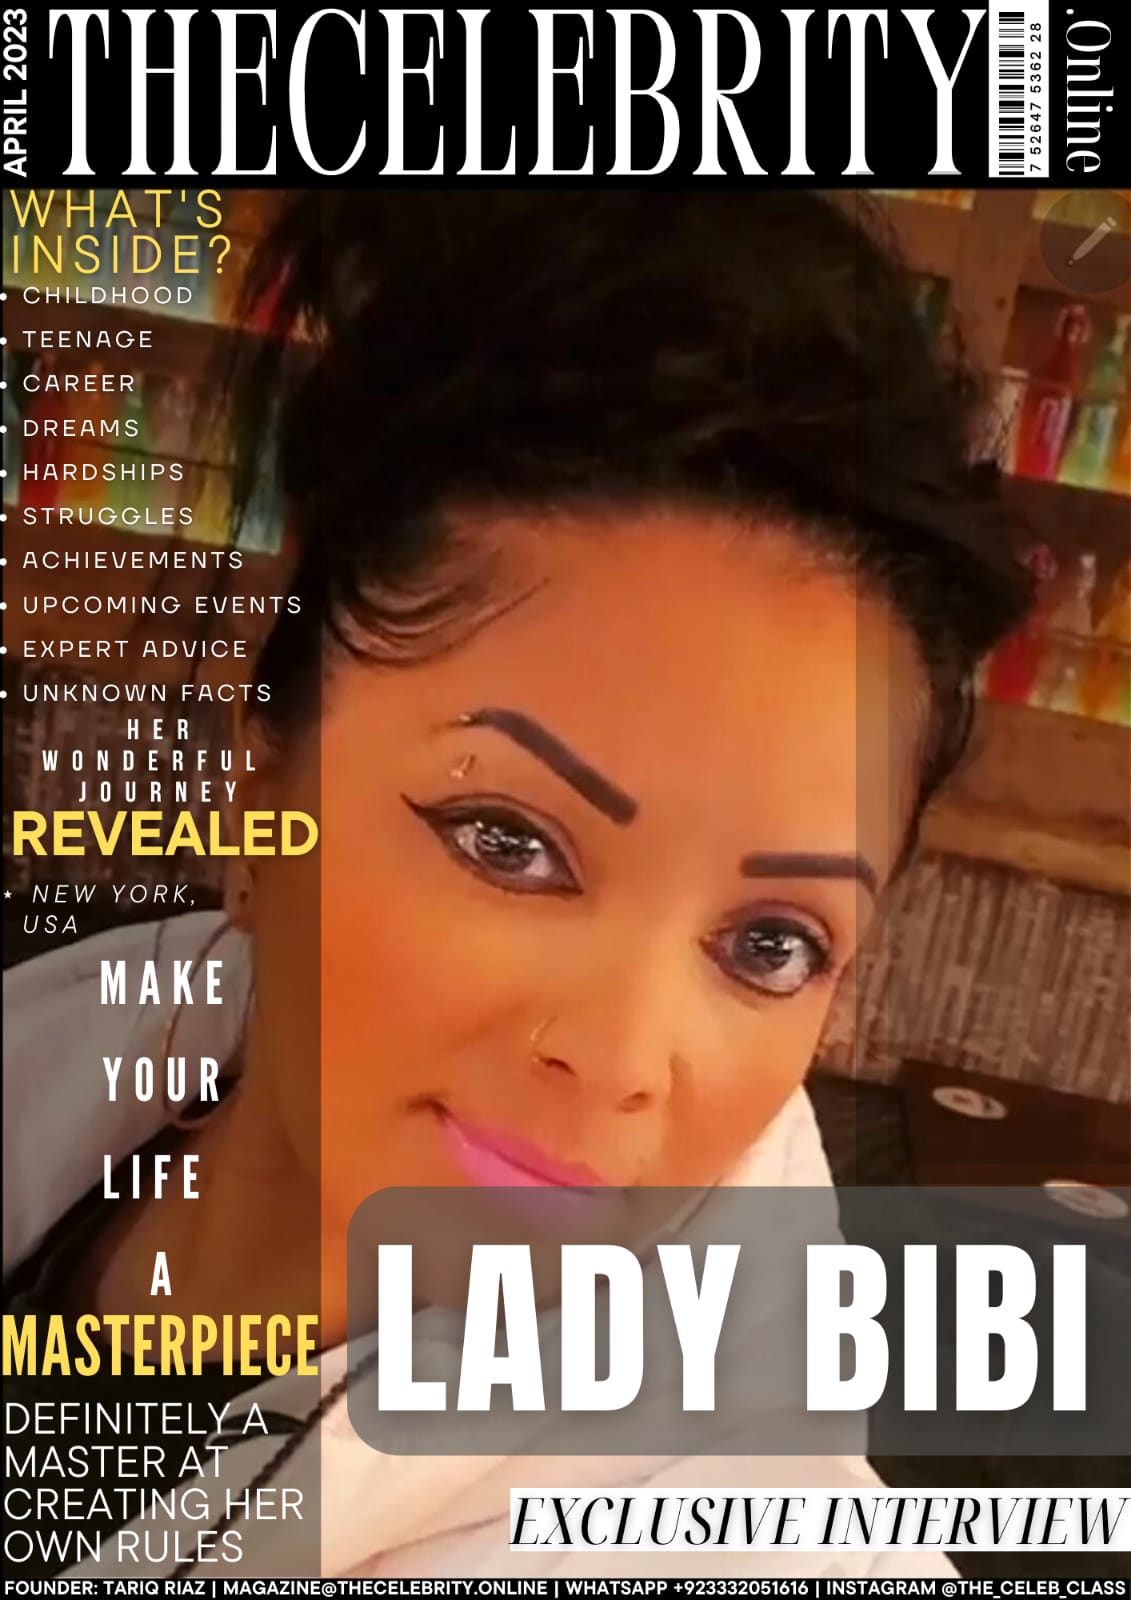 Lady Bibi Exclusive Interview – ‘Never give up and master your own craft’